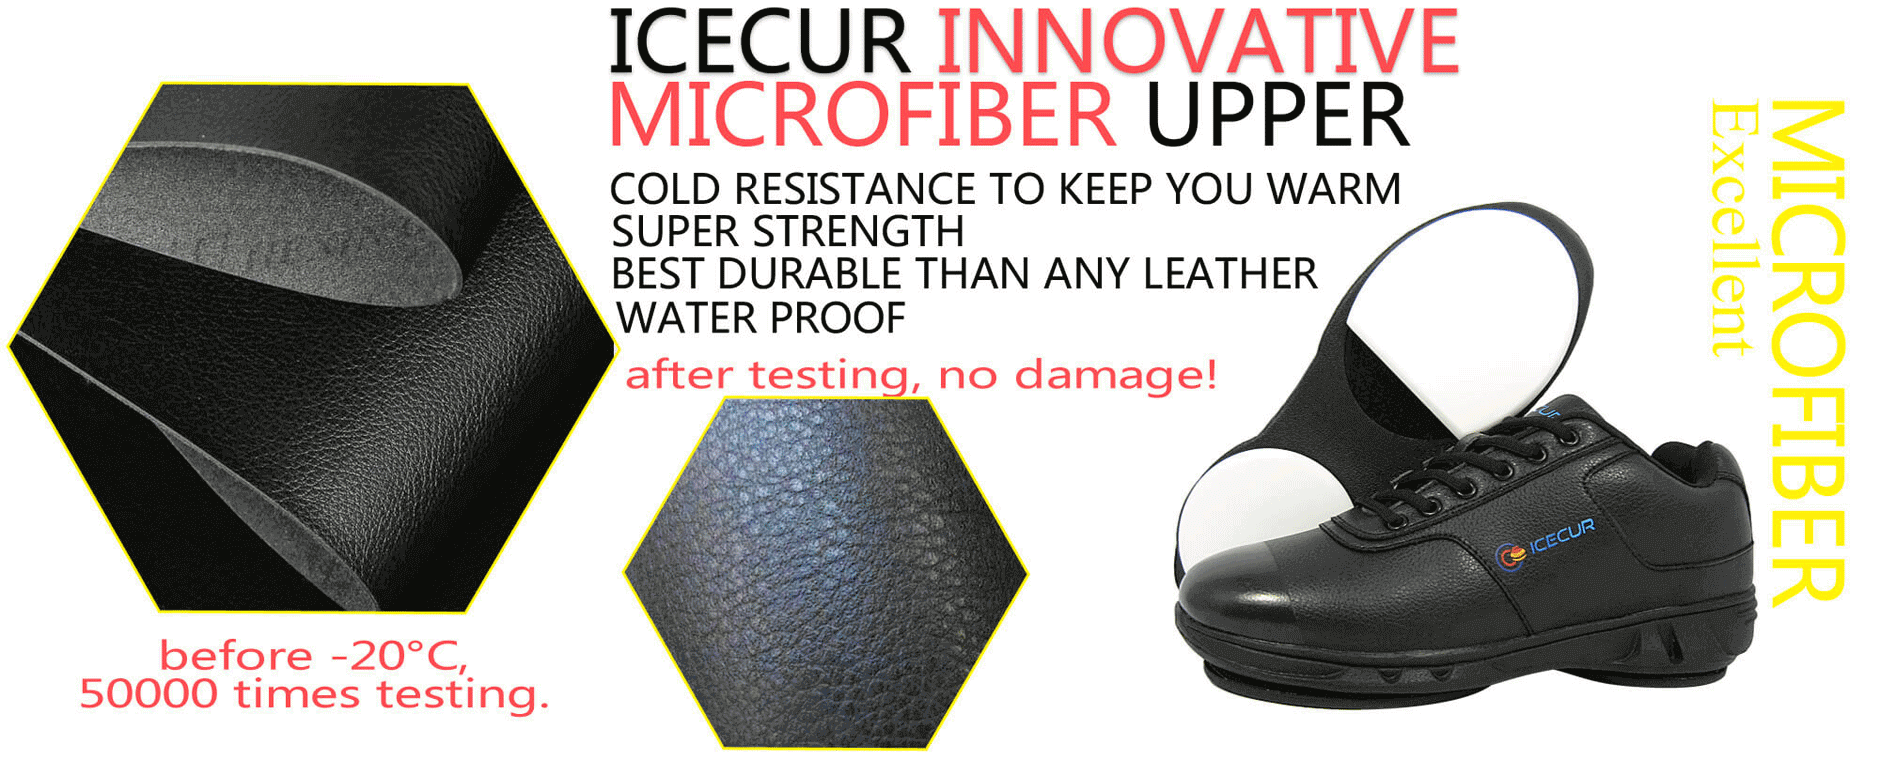 Icecur Curling Shoes